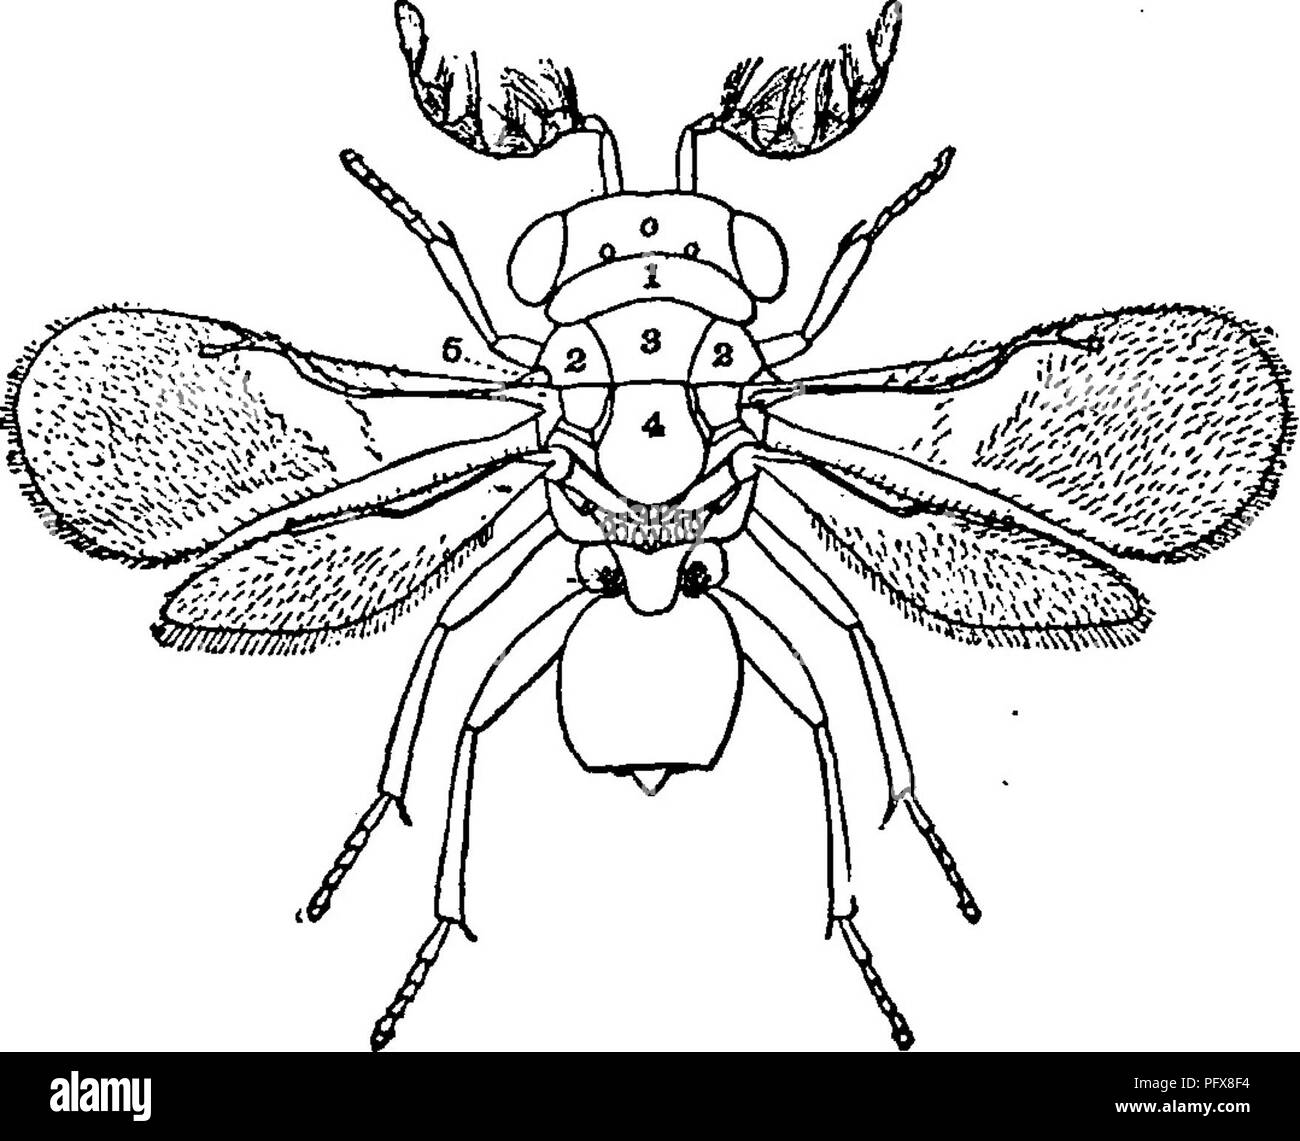 . A manual for the study of insects. Insects. Fig. 757 —Eva7tia appendigaster. Fig. T^Z.—Fosnus. Evania appendigaster (E-van'i-a ap-pen-di-gas'ter) (Fig. 757)&gt; from the ootheca of a cockroach, and have found another, a species of Fcemis (Foe'nus) (Fig. 758), common on flowers. We have named these insects Ensign-flies, because they carry the abdomen aloft like a flag. Family Chalcidtd^ (Chal-cid'i-dae). T/ie Chalcis-fiies. The Chalcis-flies are among the smaller of the parasitic Hymenoptera. In fact they are usually minute insects, often not more than one one-hundredth of an inch in length ; Stock Photo